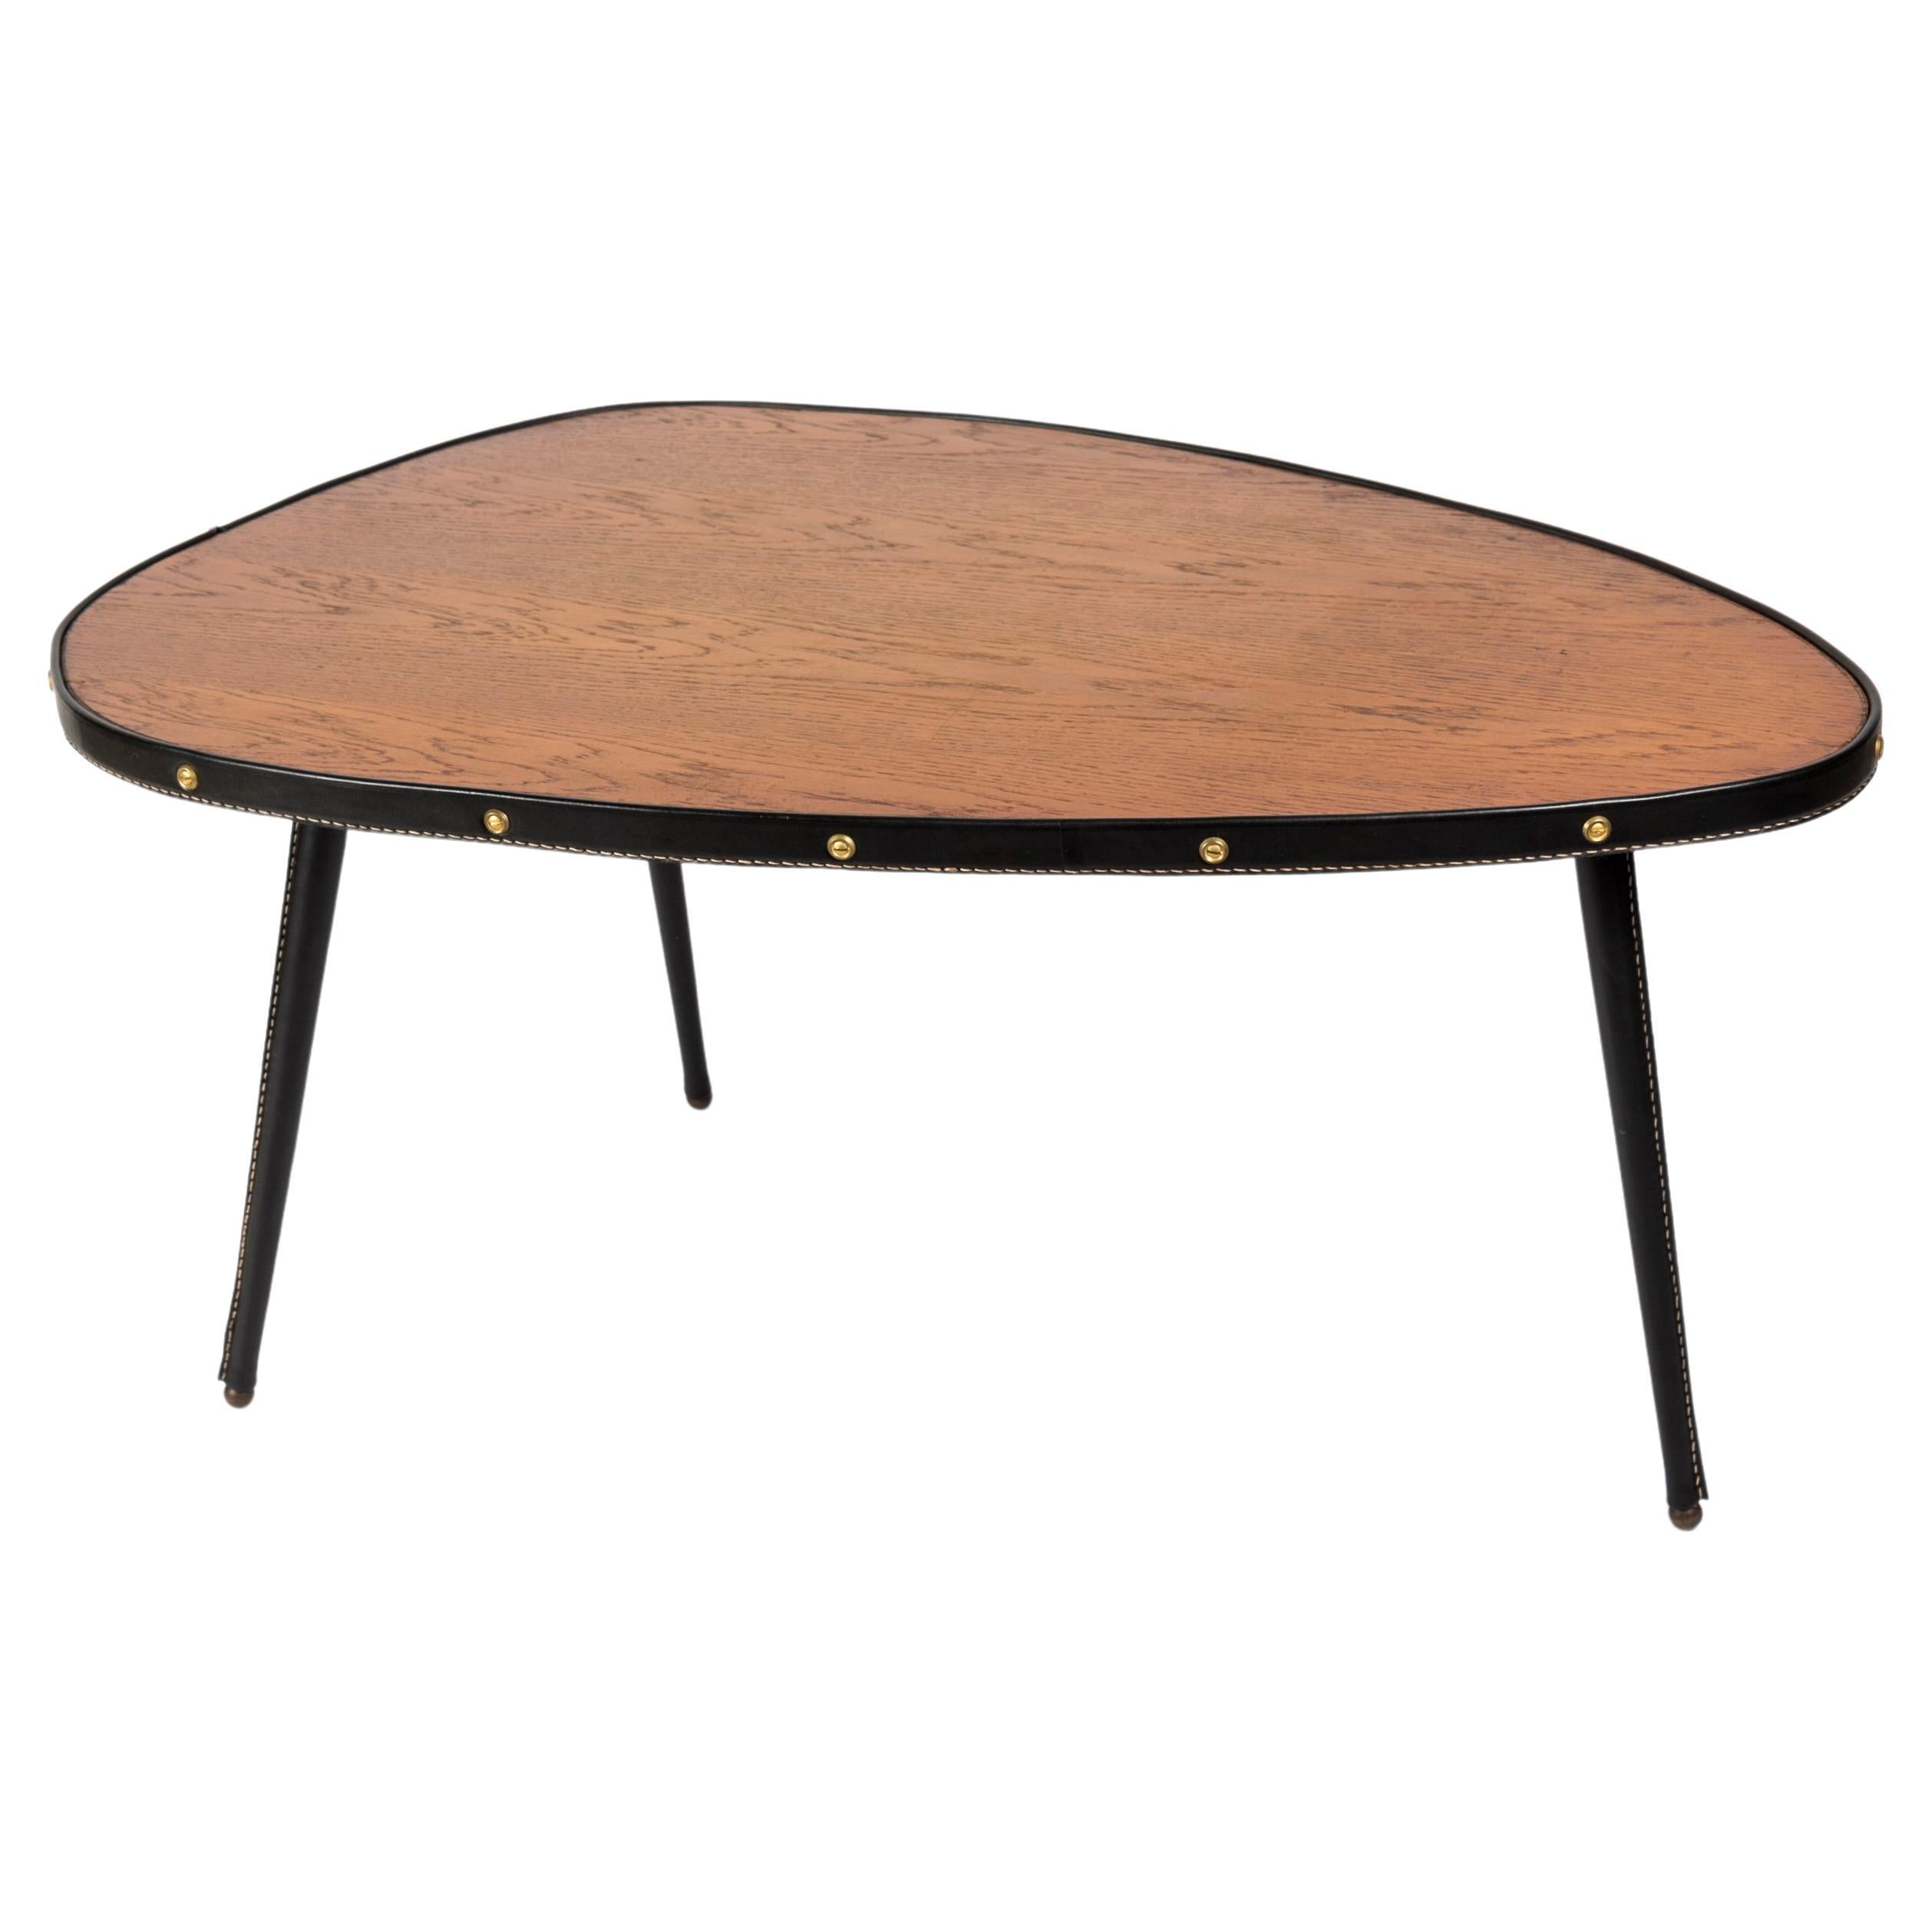 1950's Stitched leather free form cocktail table by Jacques Adnet For Sale